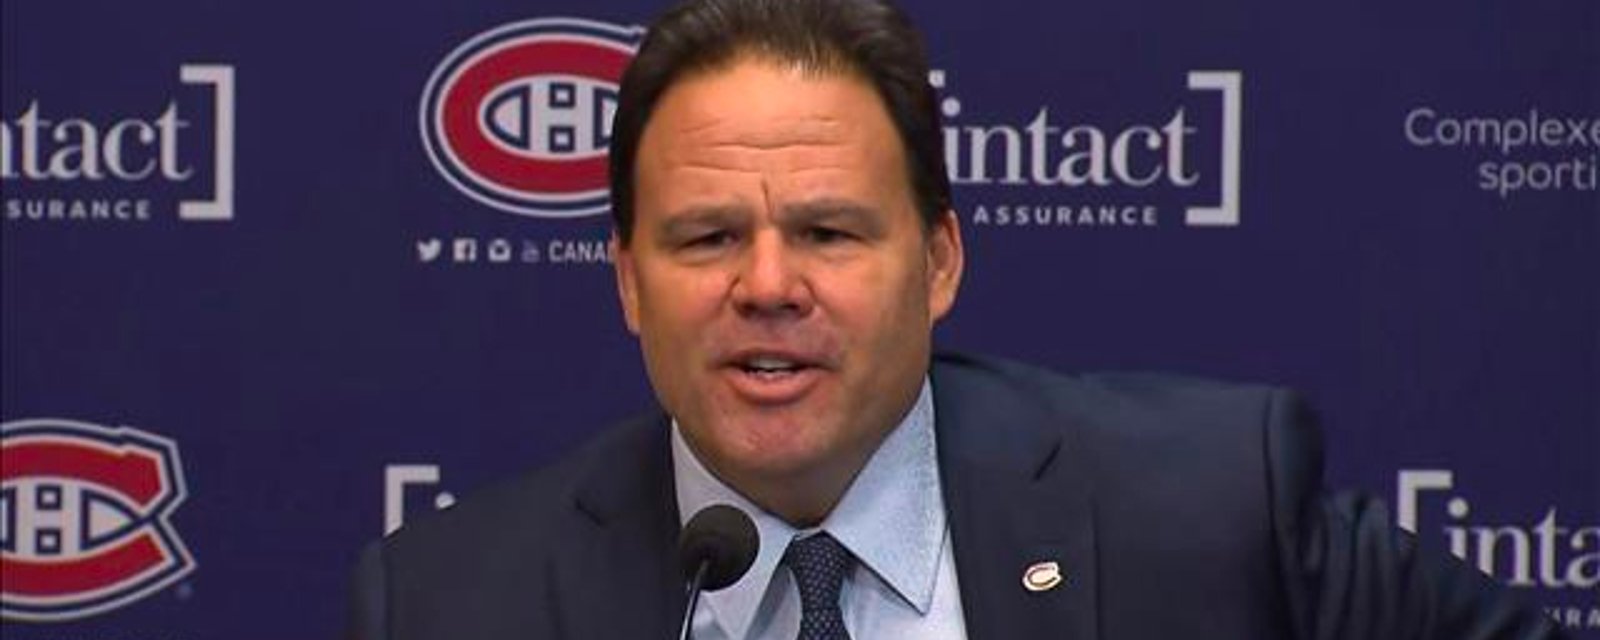 Jeff Gorton wants “somebody a little outside the box” for new Habs GM and fans are quick to react